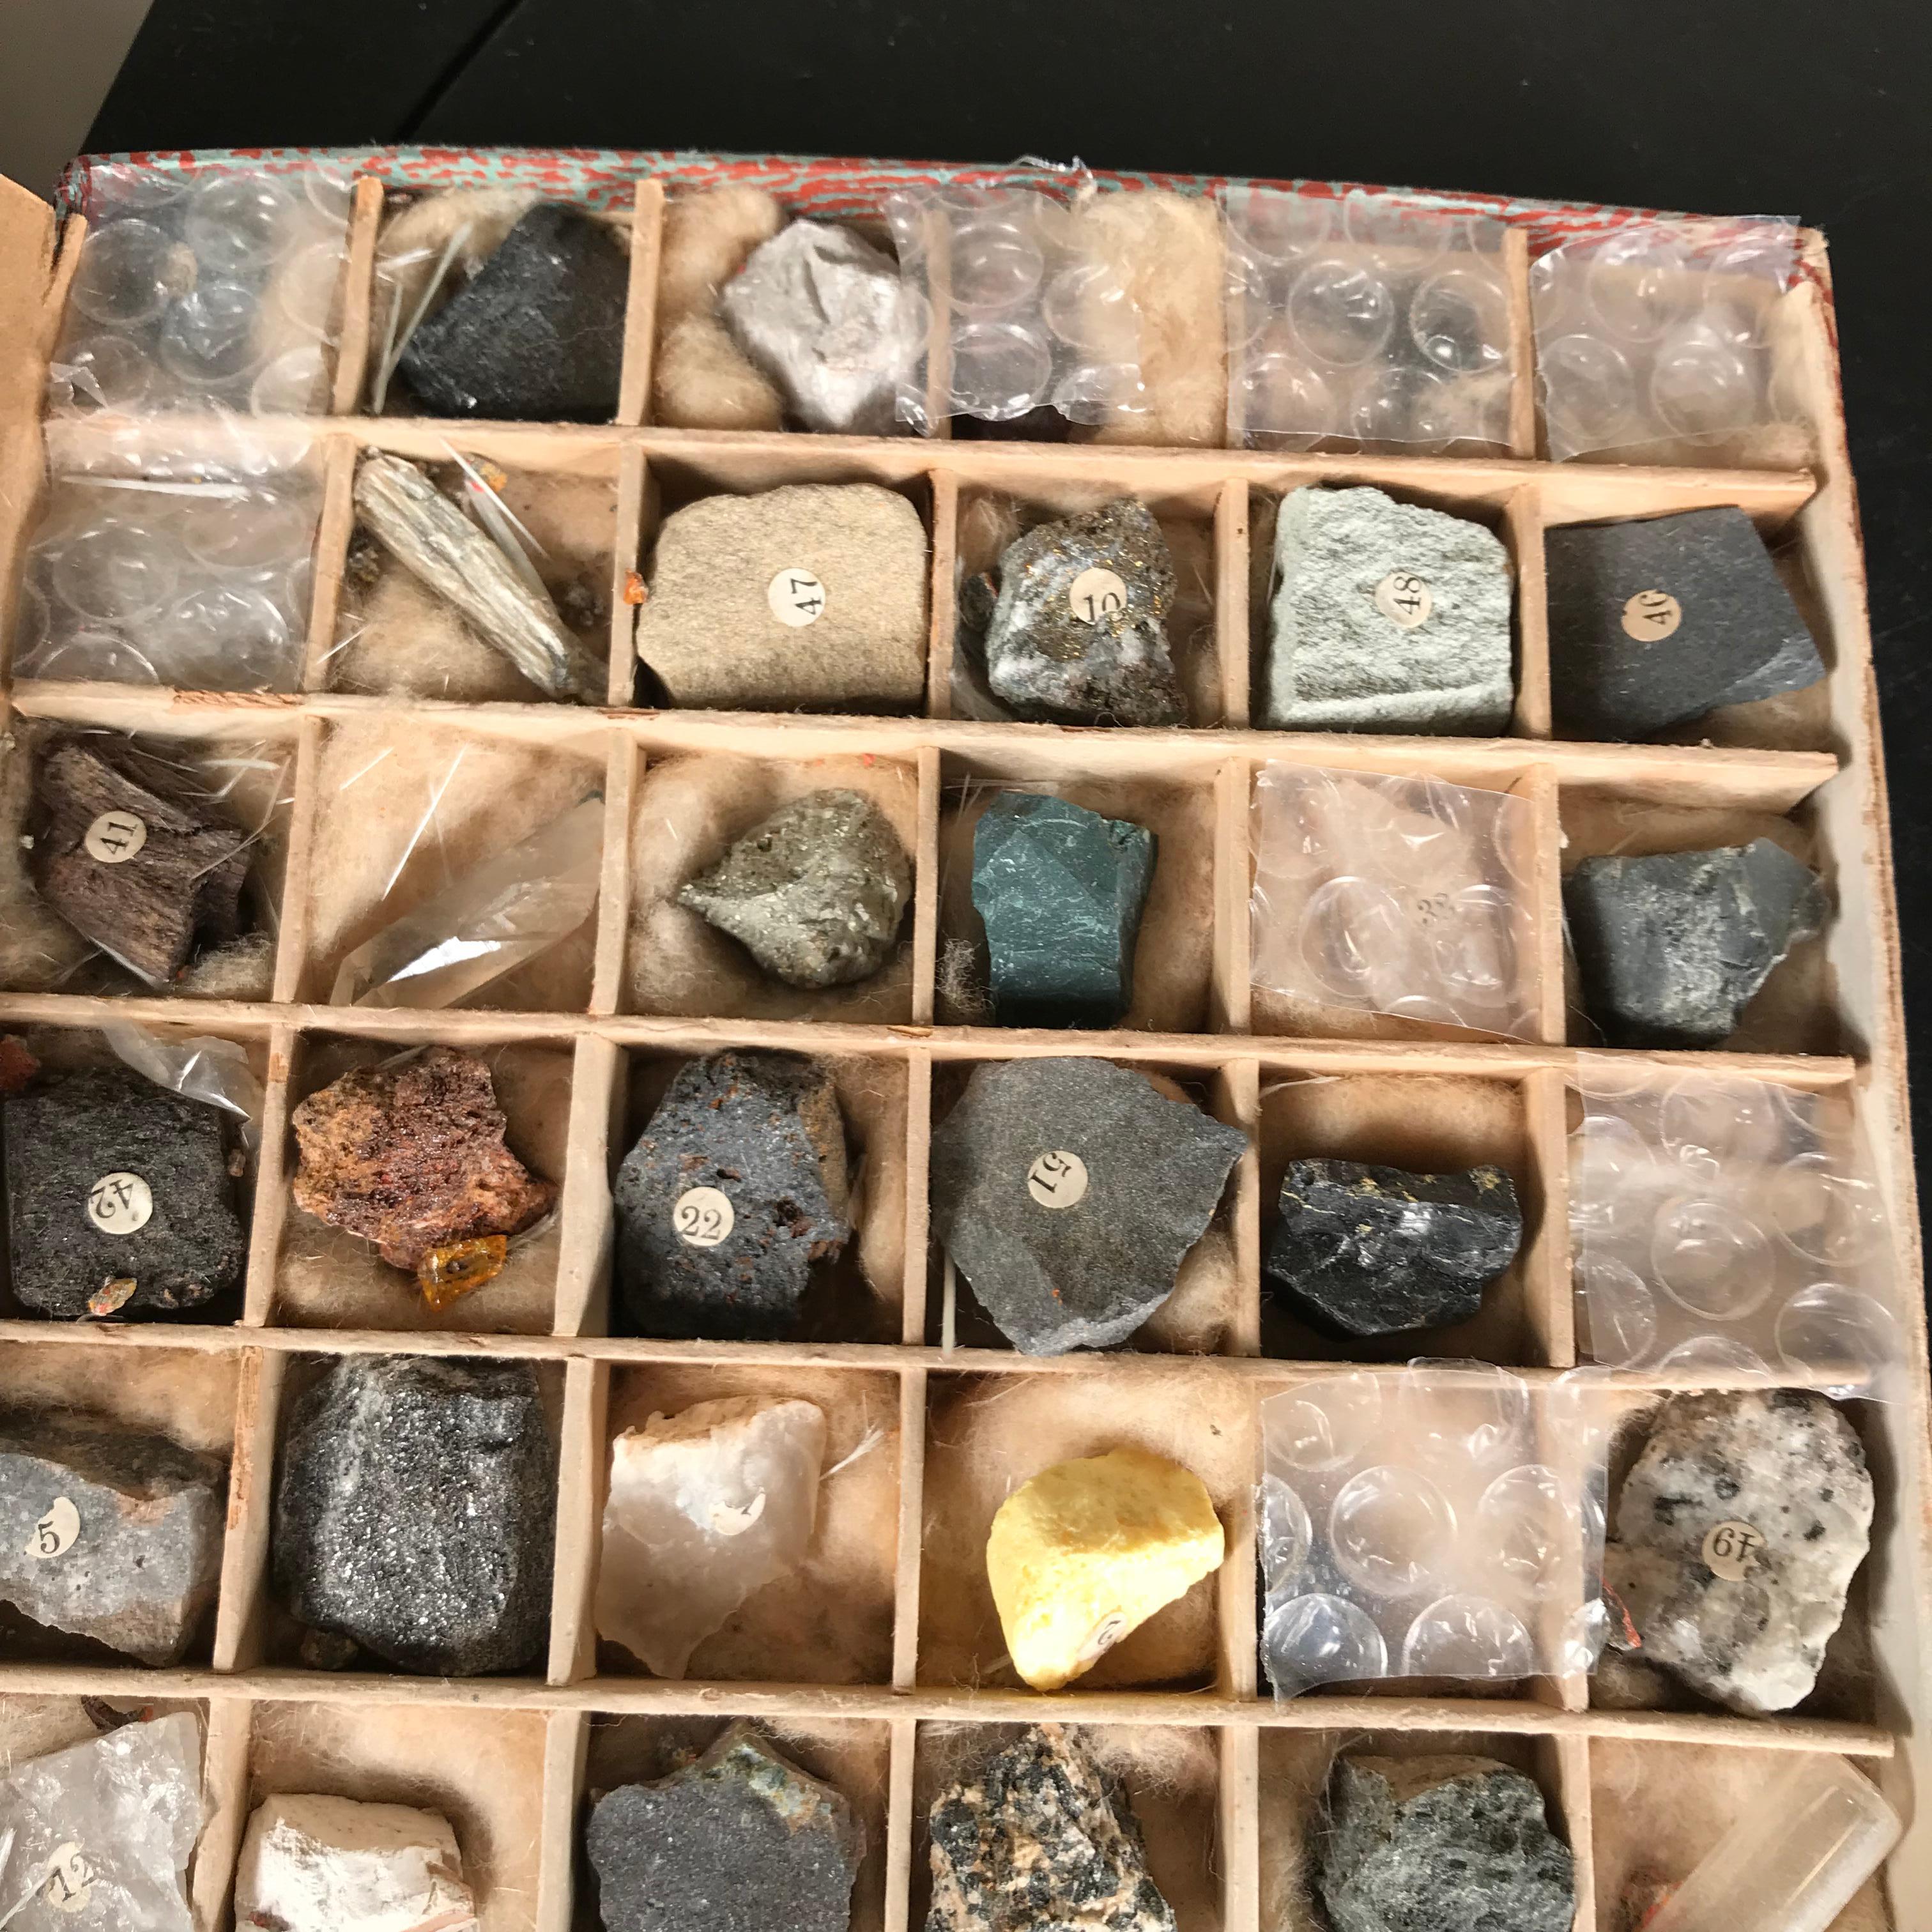 Taisho Japanese Antique Mineral Specimens Boxed Collection, 54 Specimens